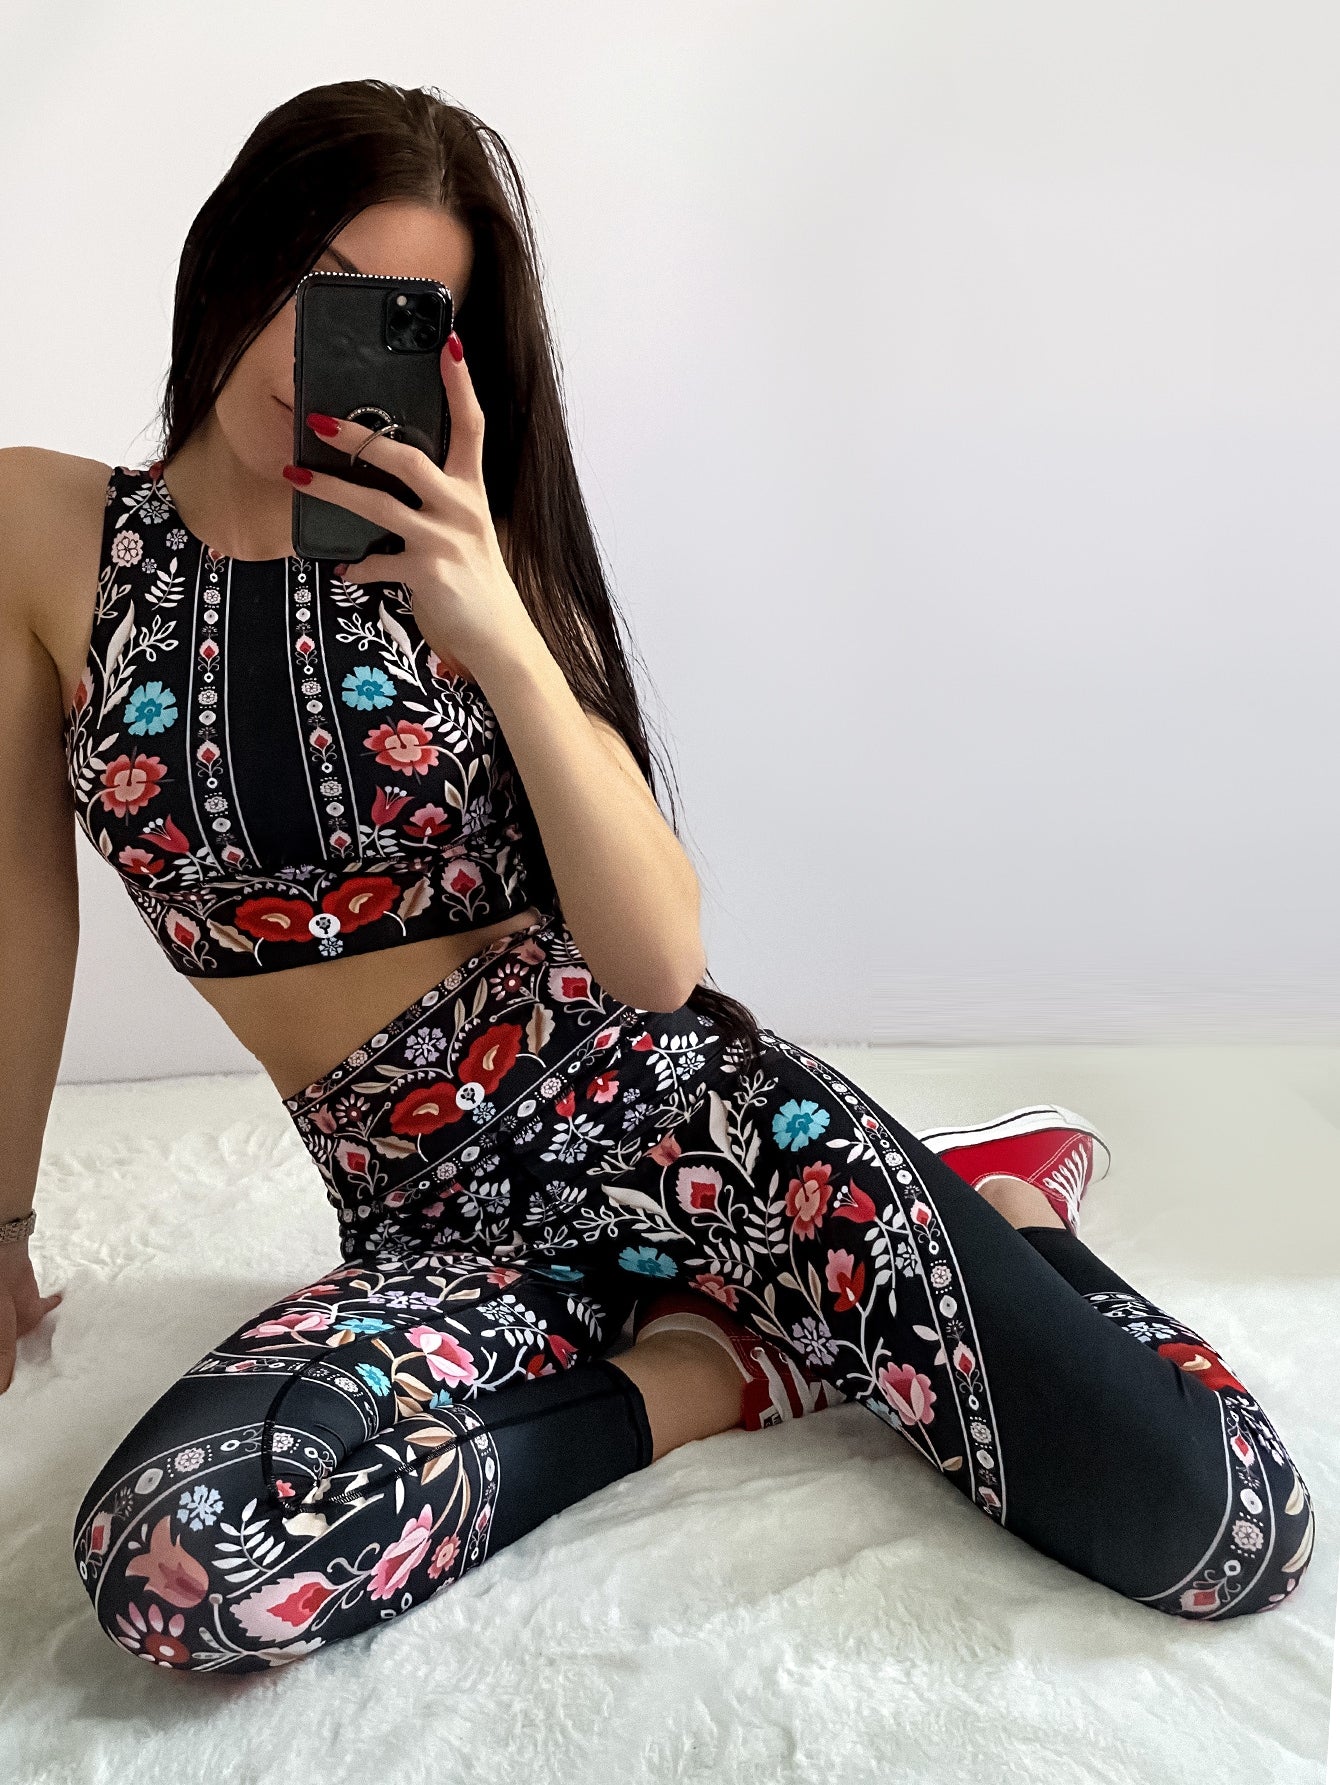 SHEIN ACTIVEWEAR TRY ON HAUL & REVIEW